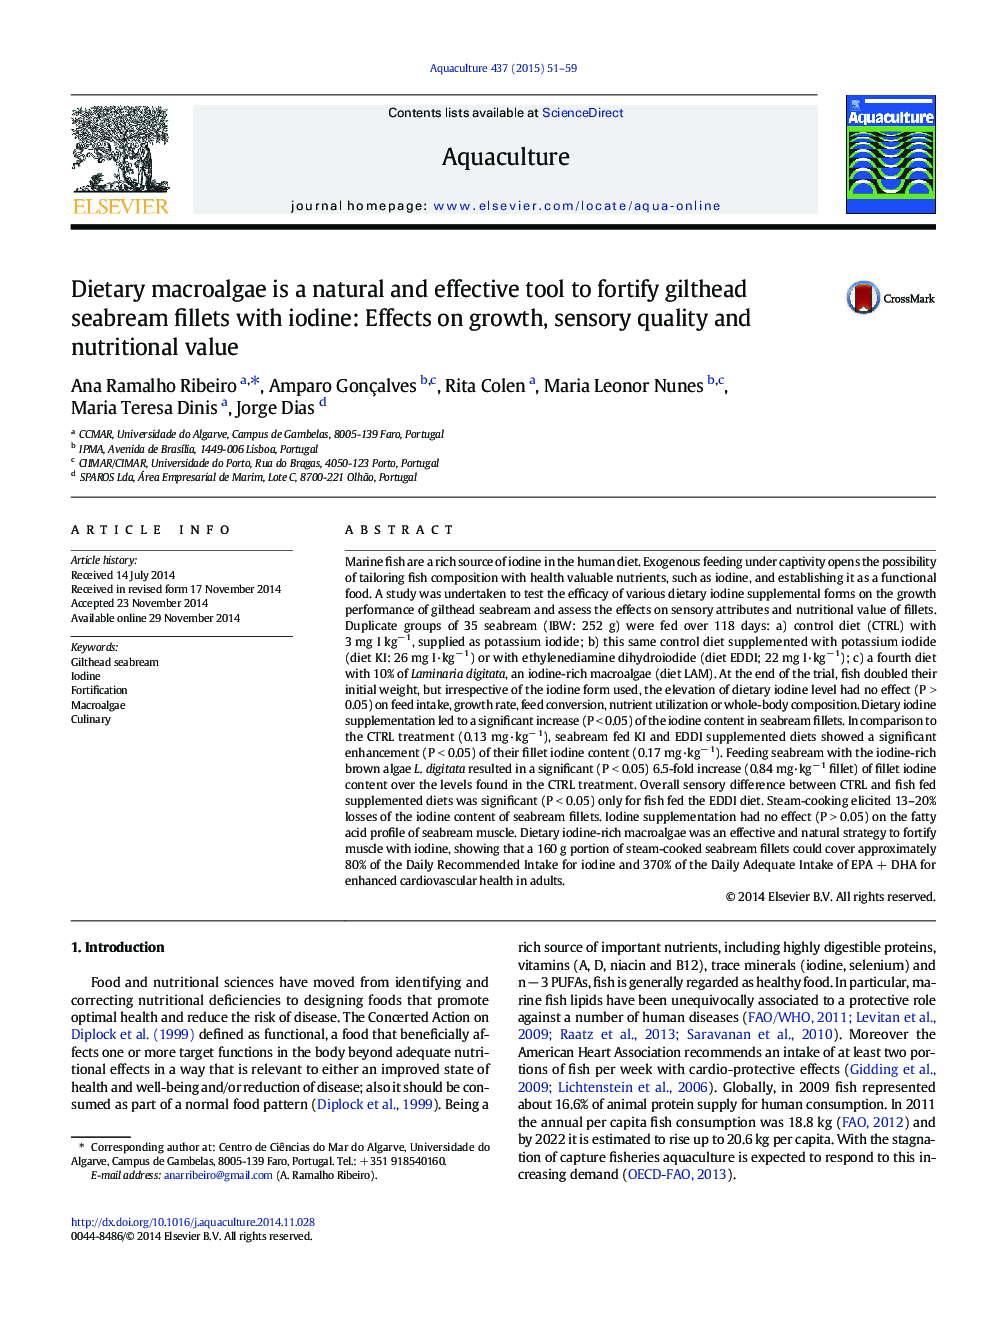 Dietary macroalgae is a natural and effective tool to fortify gilthead seabream fillets with iodine: Effects on growth, sensory quality and nutritional value